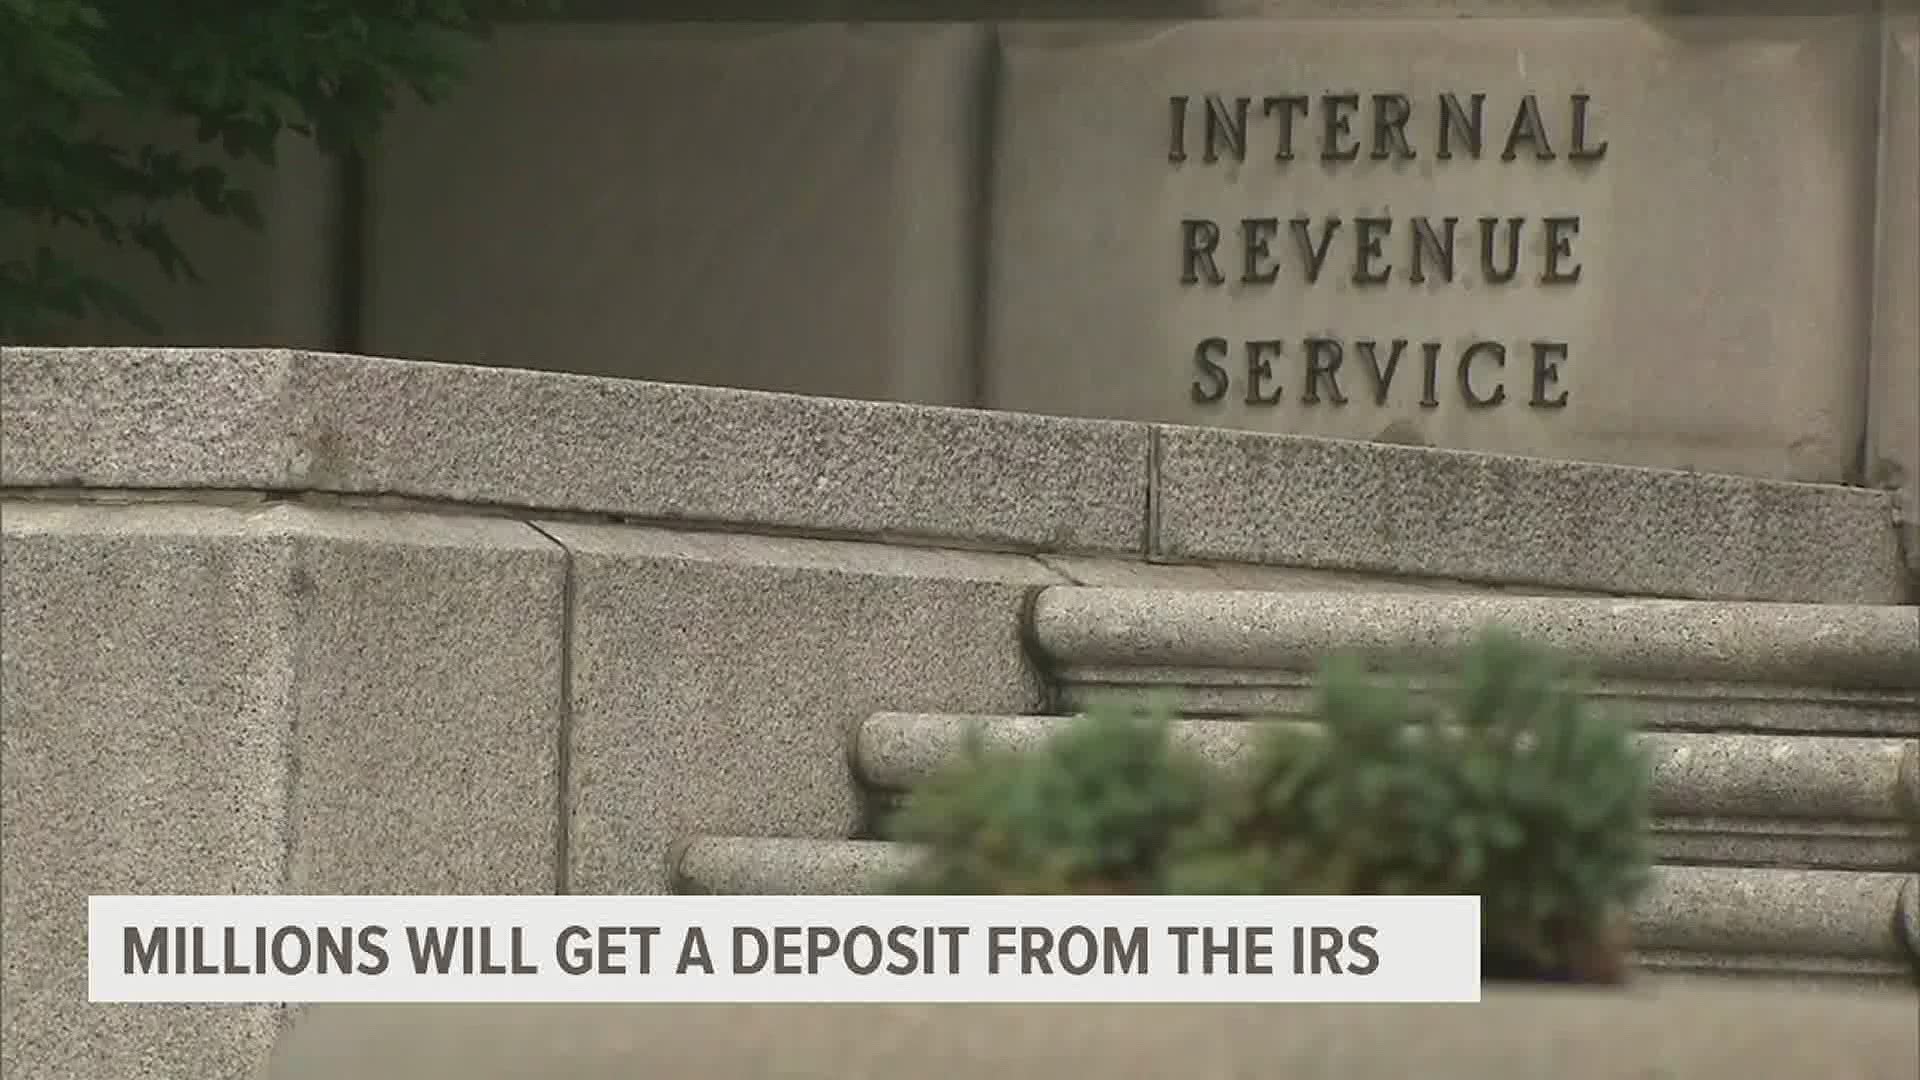 It's part of an interest payment on tax refunds filed before the July 15th deadline.